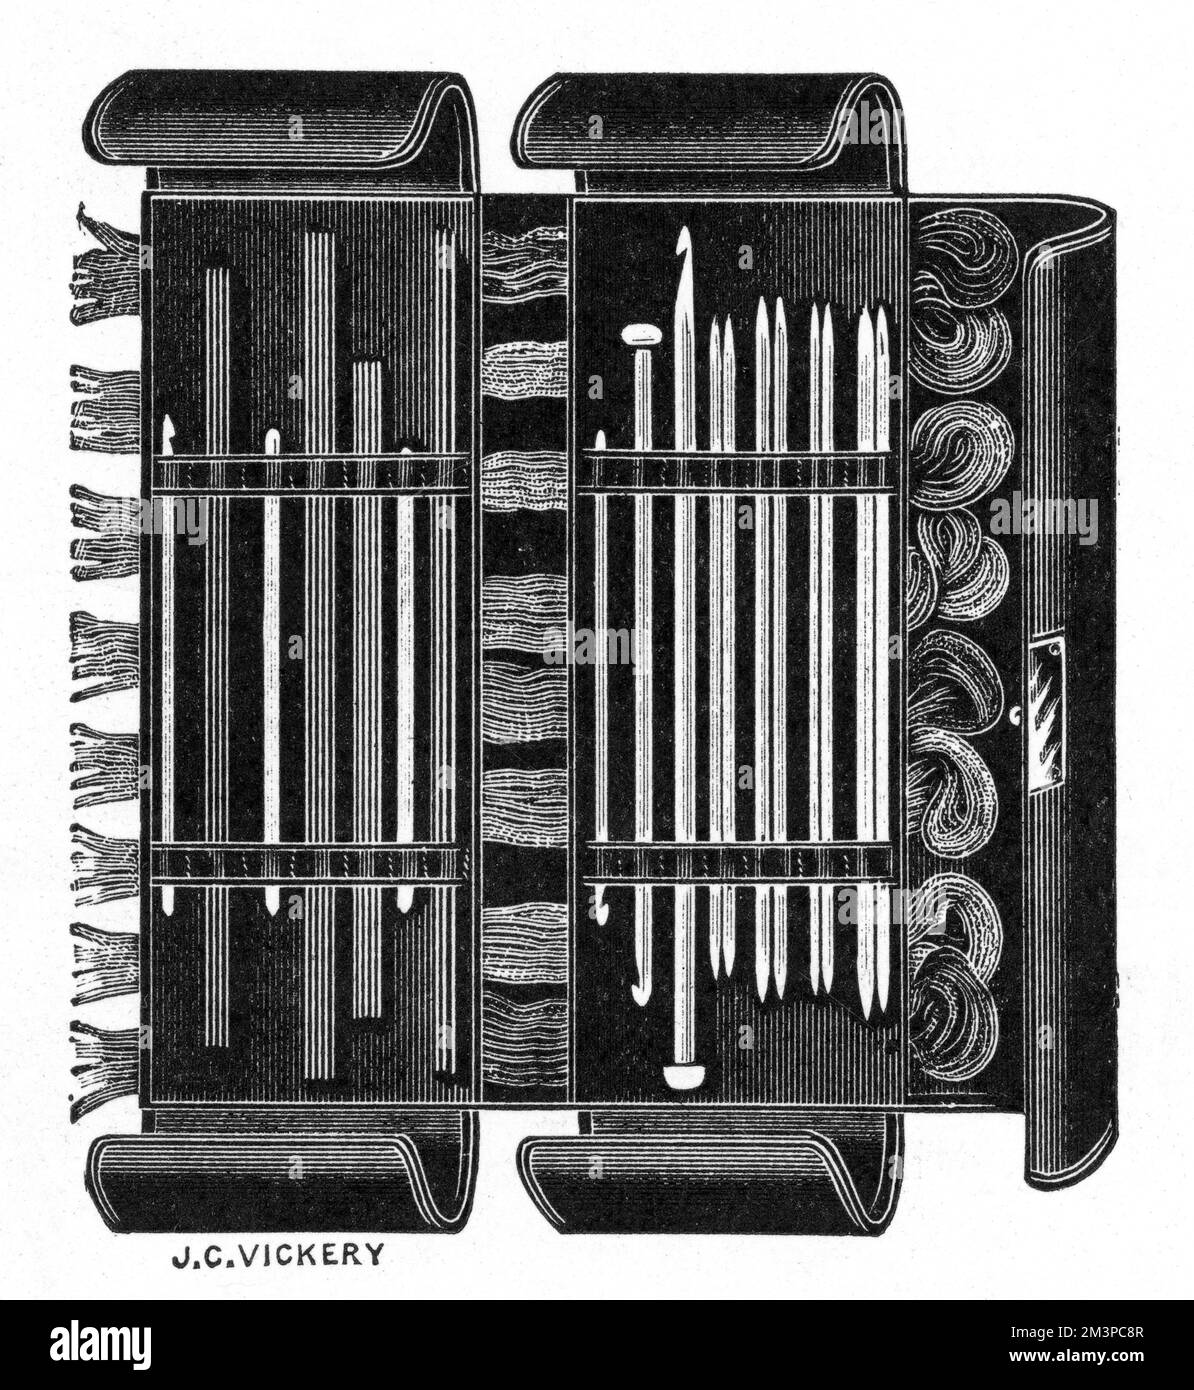 A useful knitting case from J. C. Vickery fitted with excellent bone and steel needles, crochet and wool hooks - the ideal gift for Christmas 1914, when the nation was knitting for soldiers at the front.     Date: 1914 Stock Photo